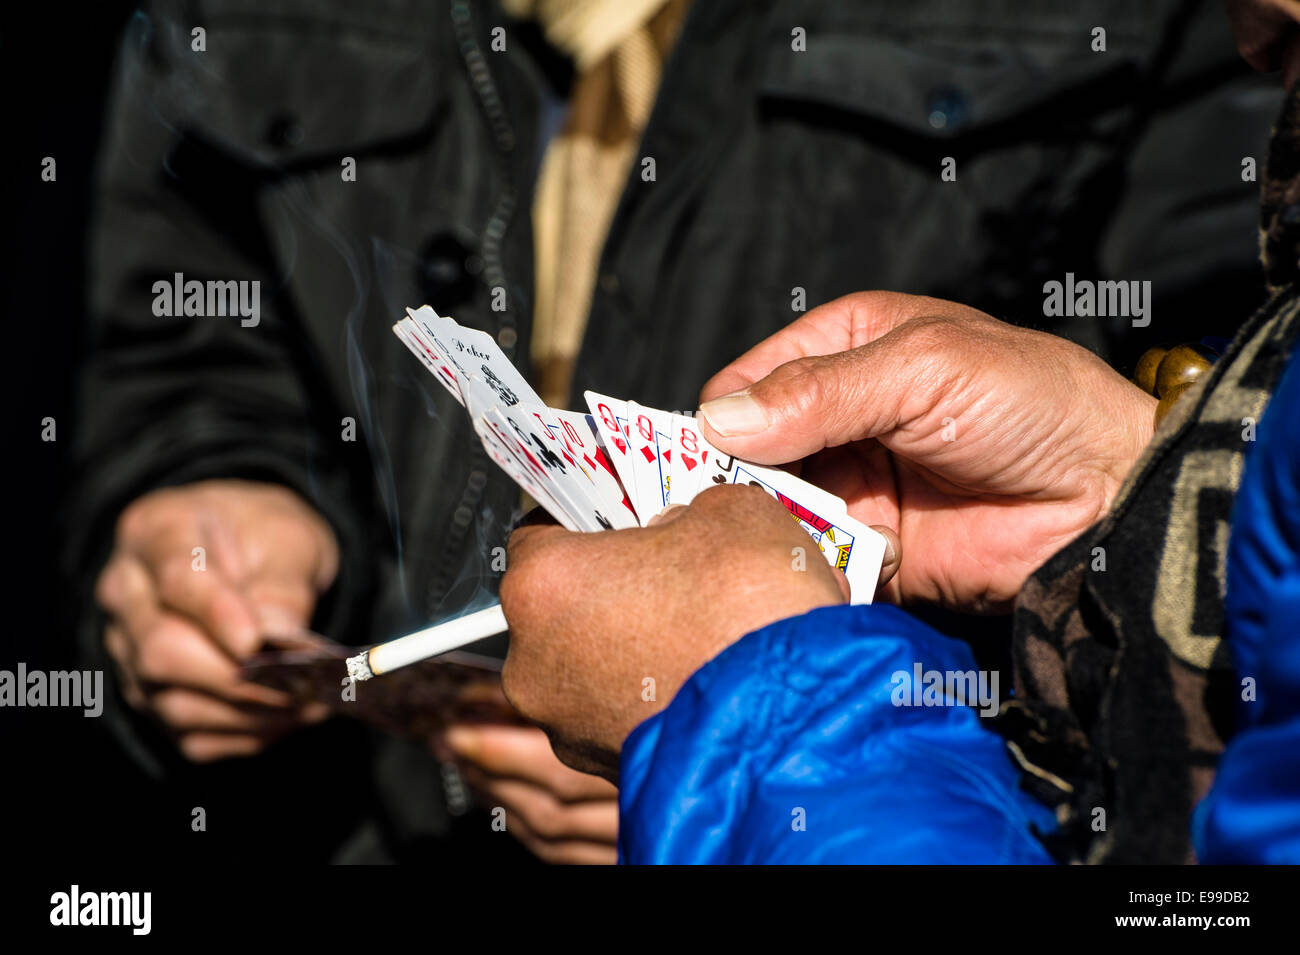 The man with a cigarette play card Stock Photo